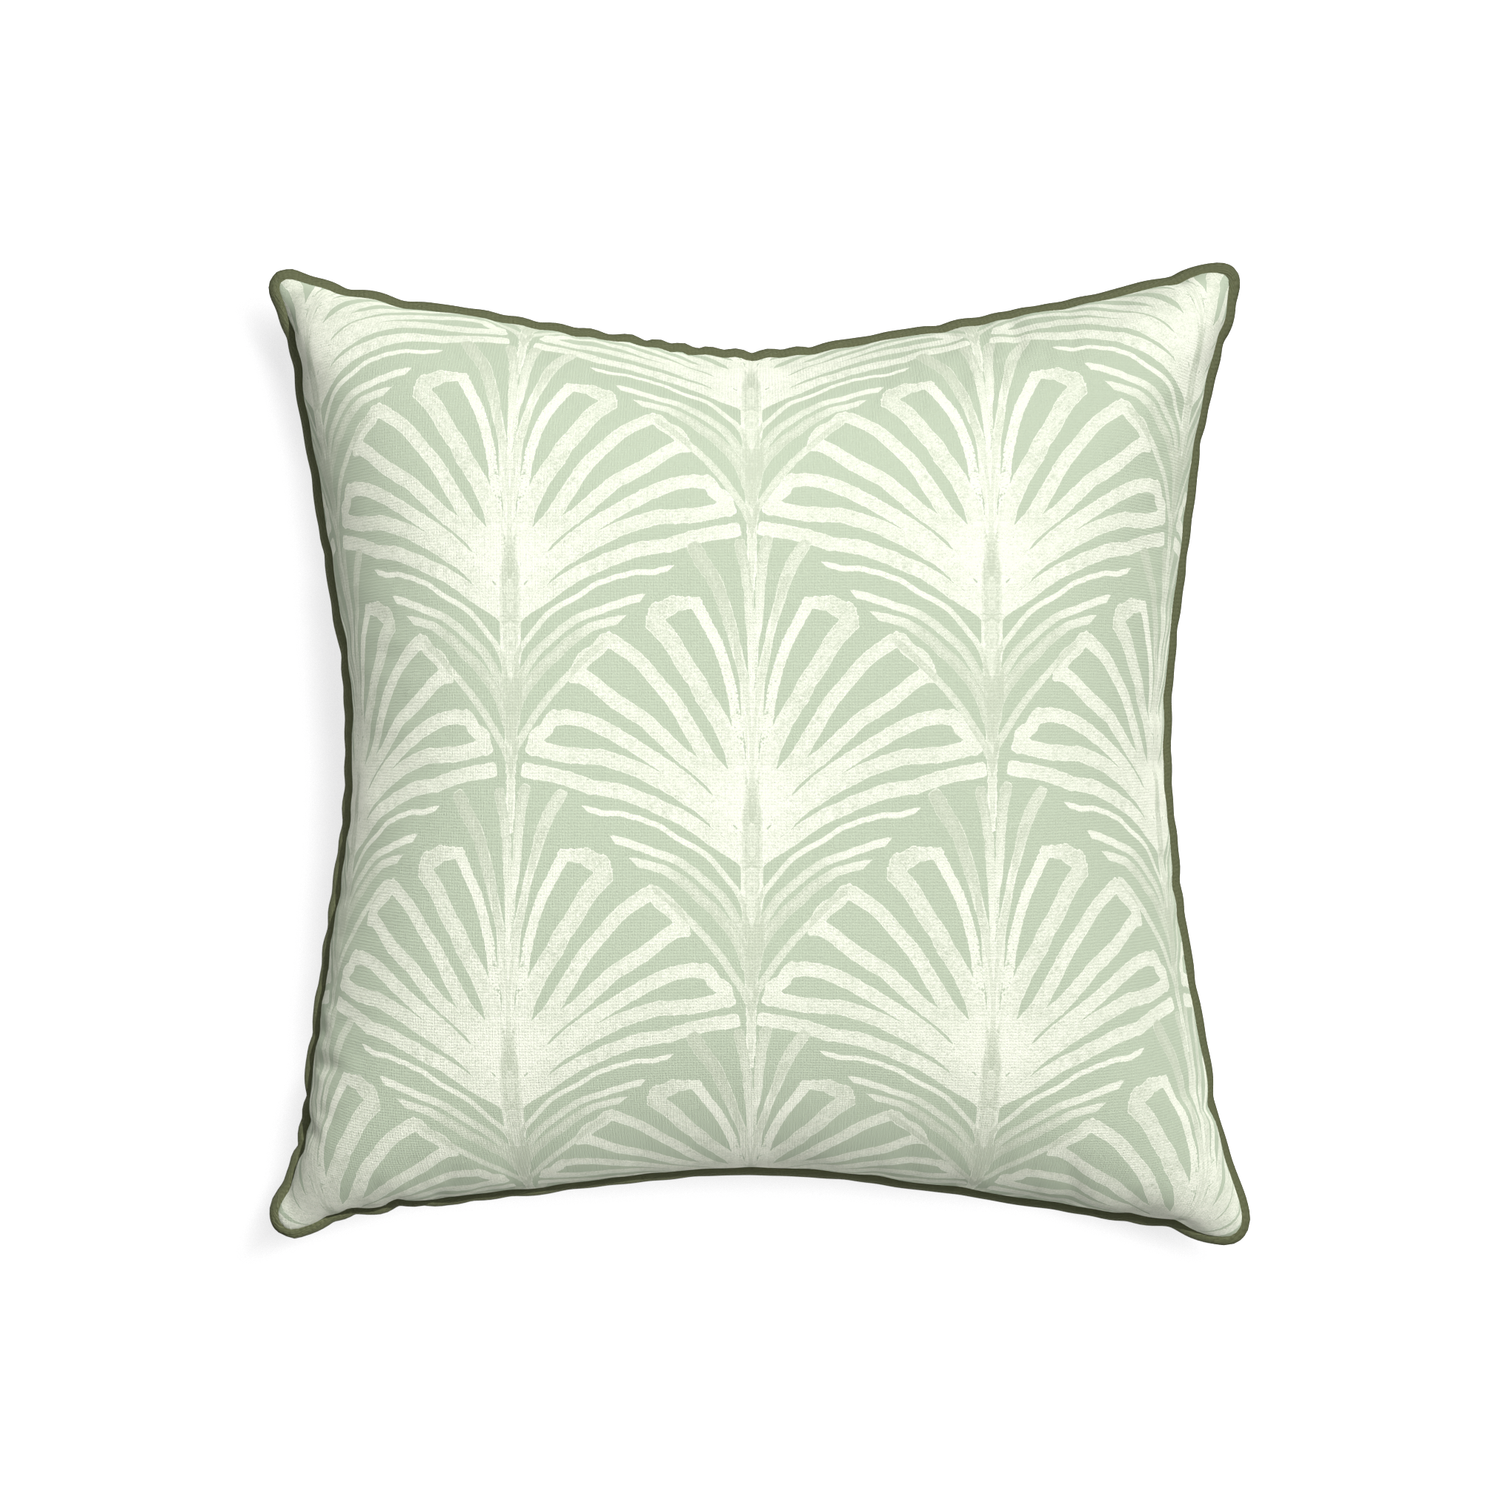 22-square suzy sage custom sage green palmpillow with f piping on white background